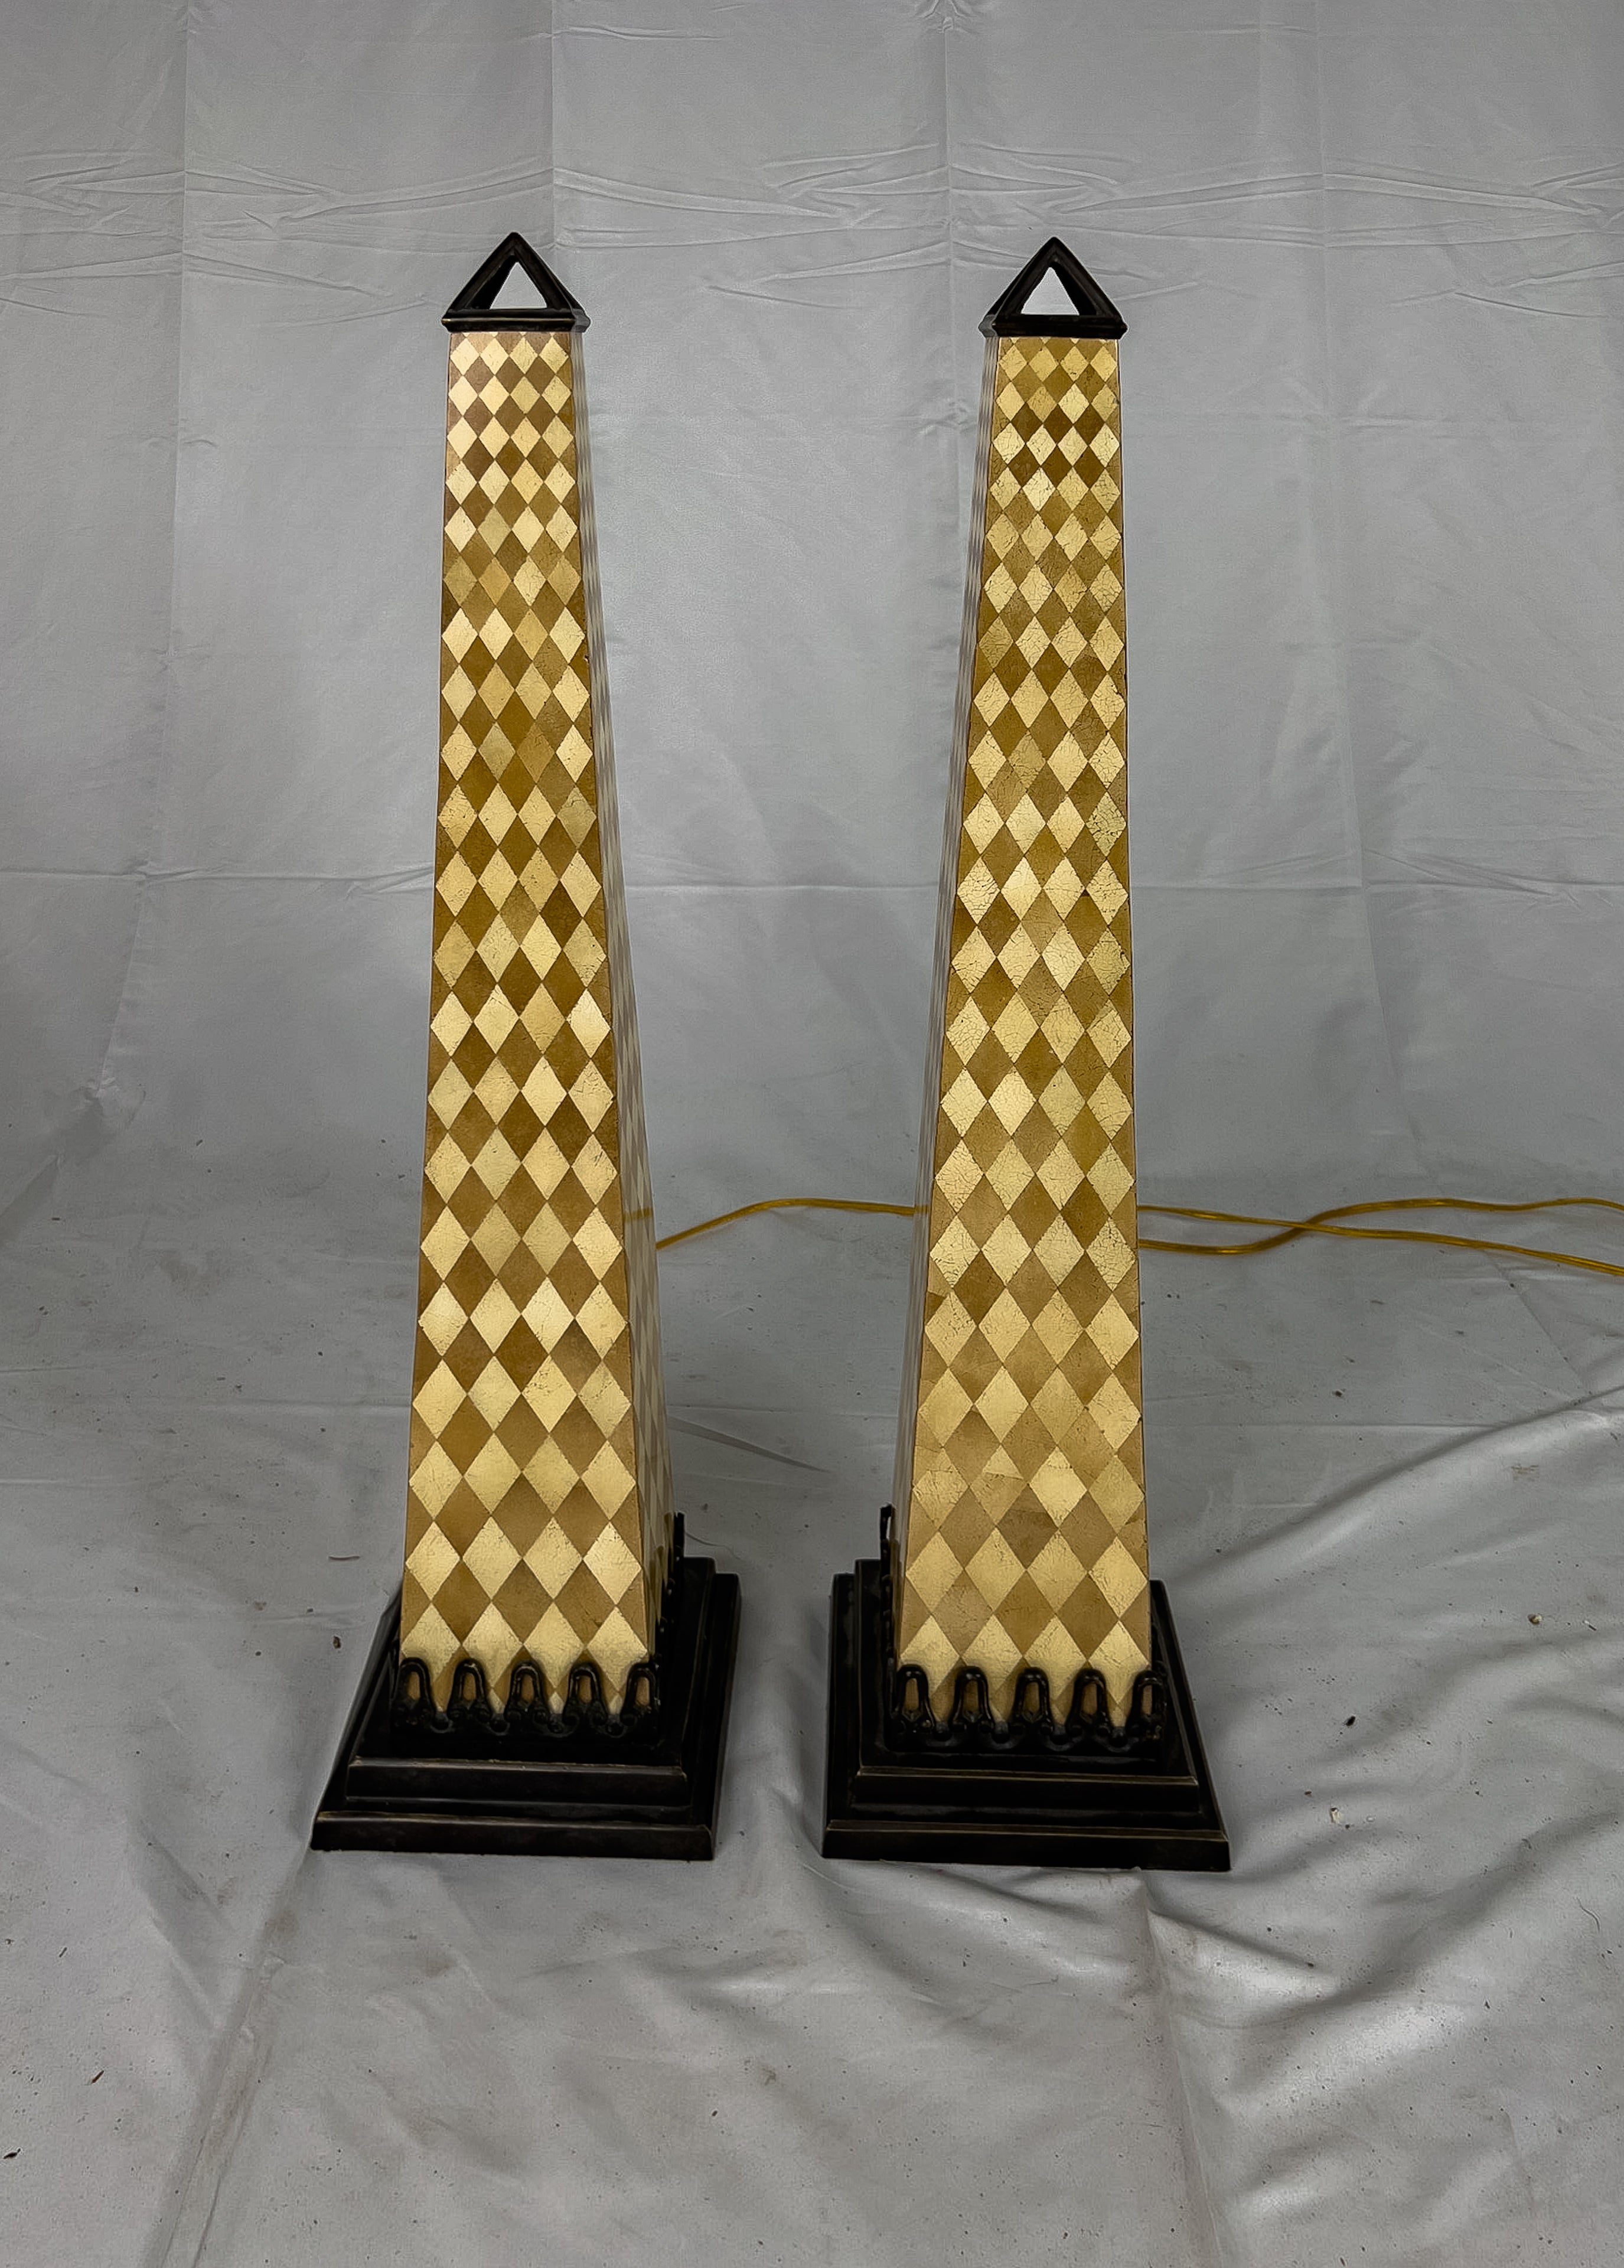 Pair of Obelisk table lamps having a harlequin pattern resin body and bronze colored metal cap and base. This lamp has a Type A plug type and is up to 120V (US Standard).